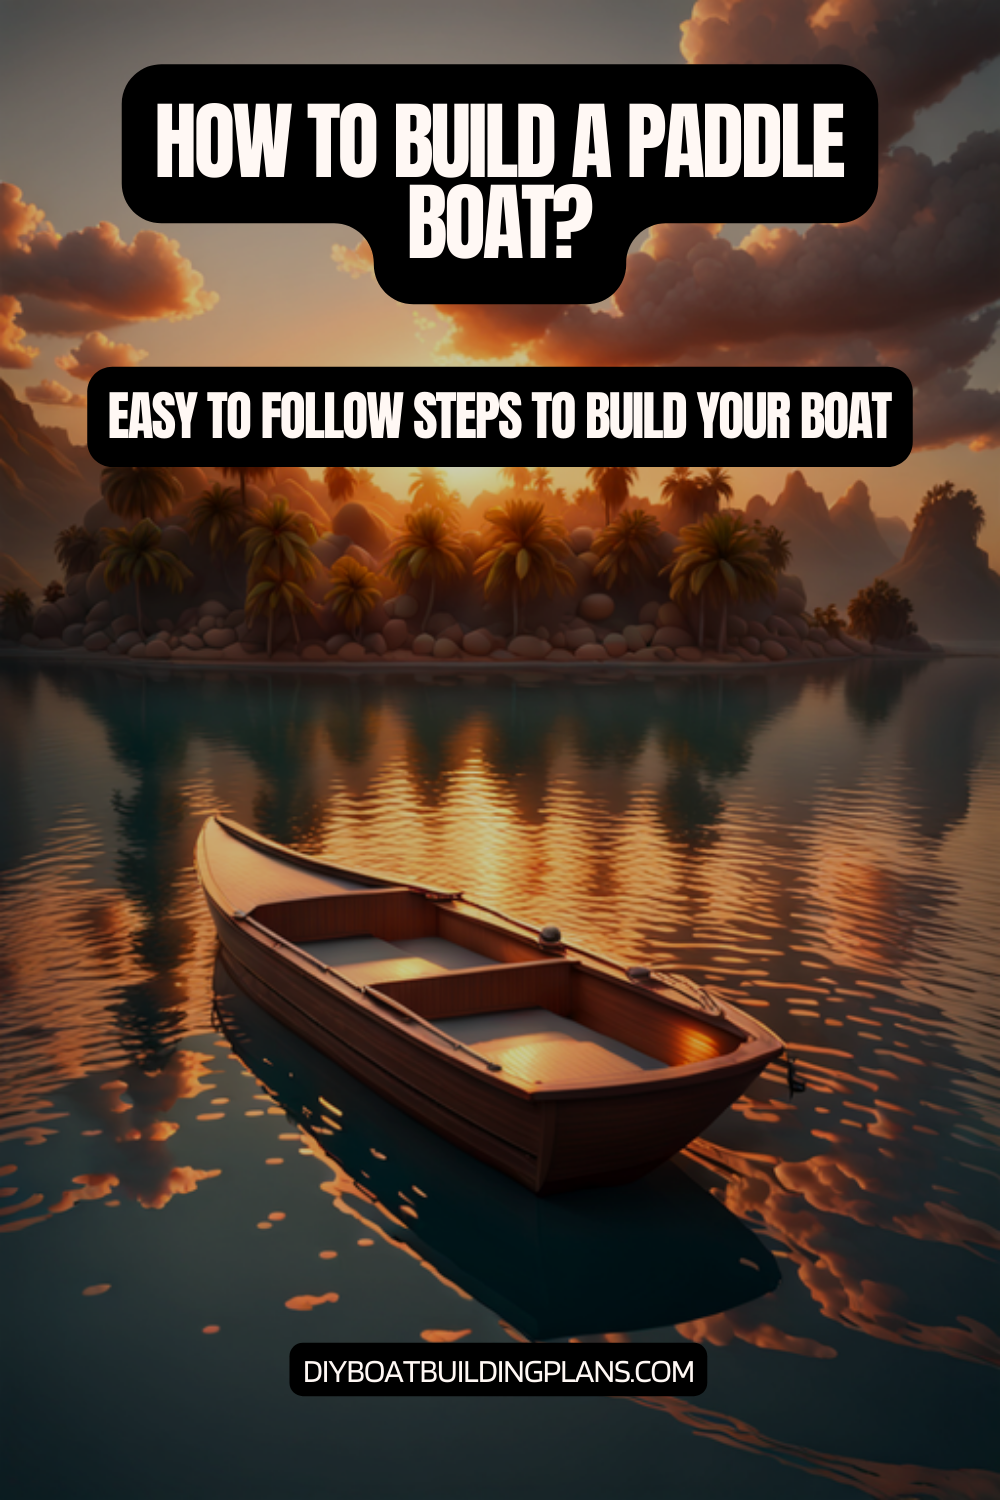 How To Build a Paddle Boat